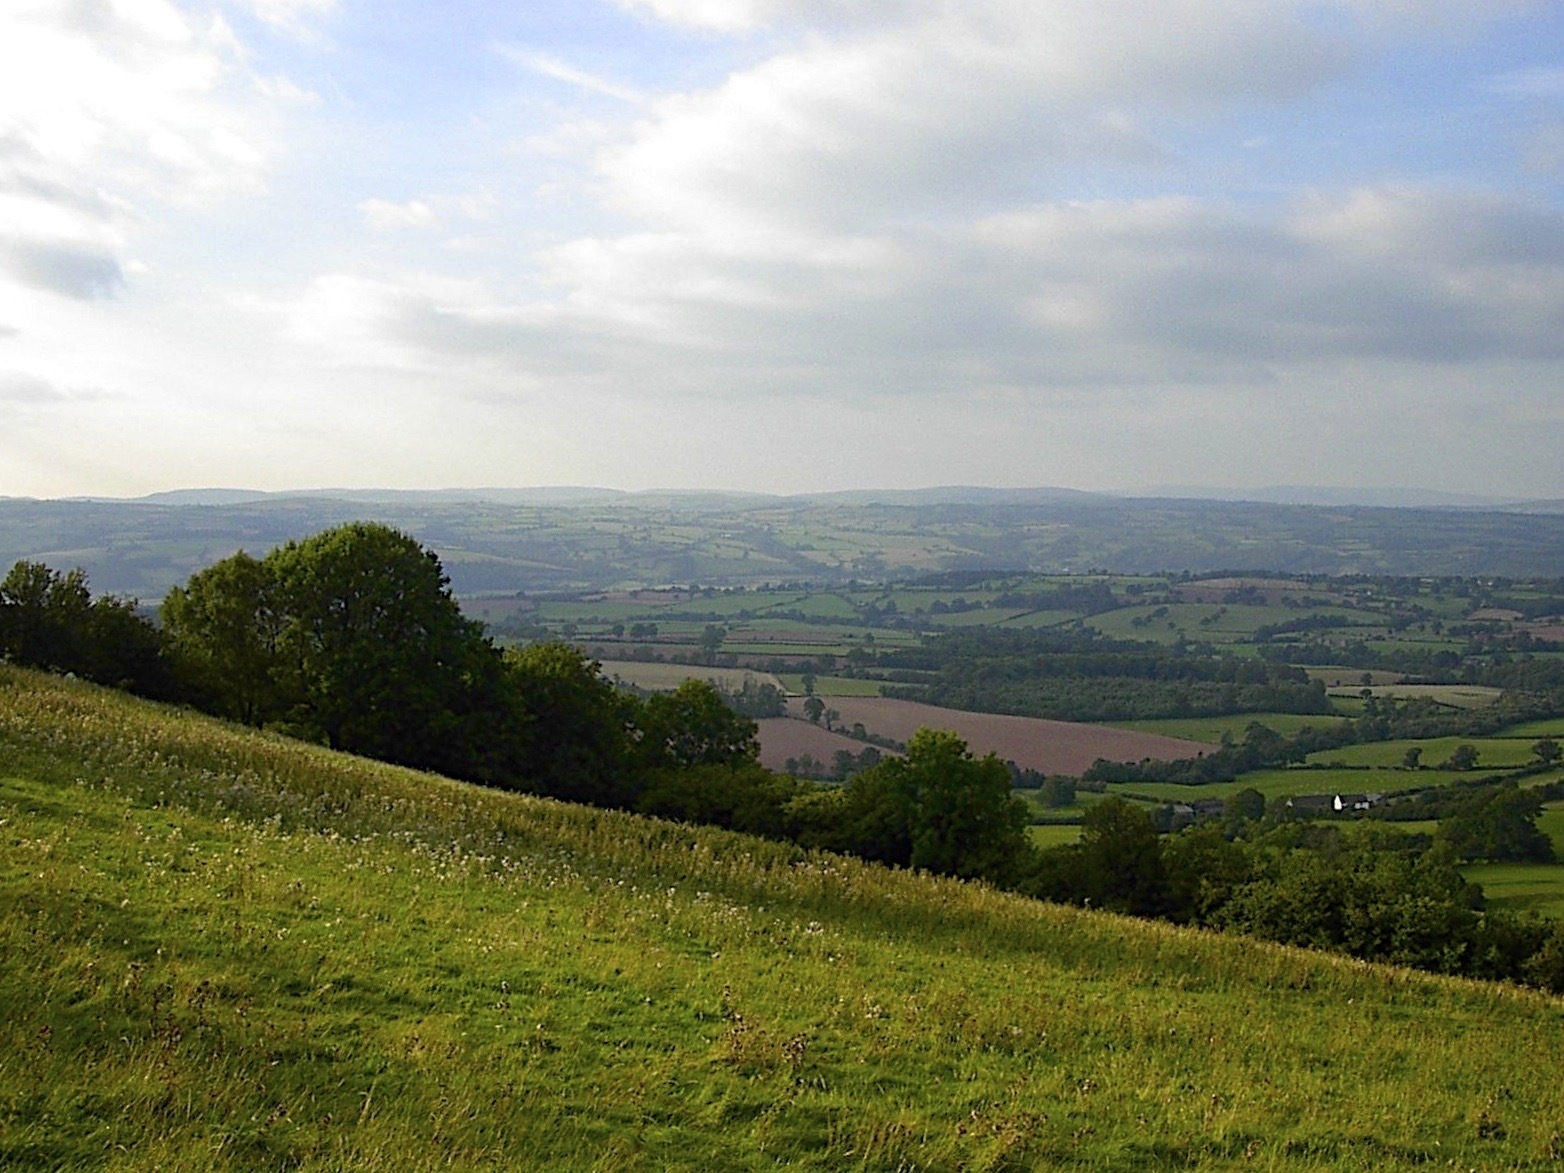 The hills above Hay-on-Wye in 2002